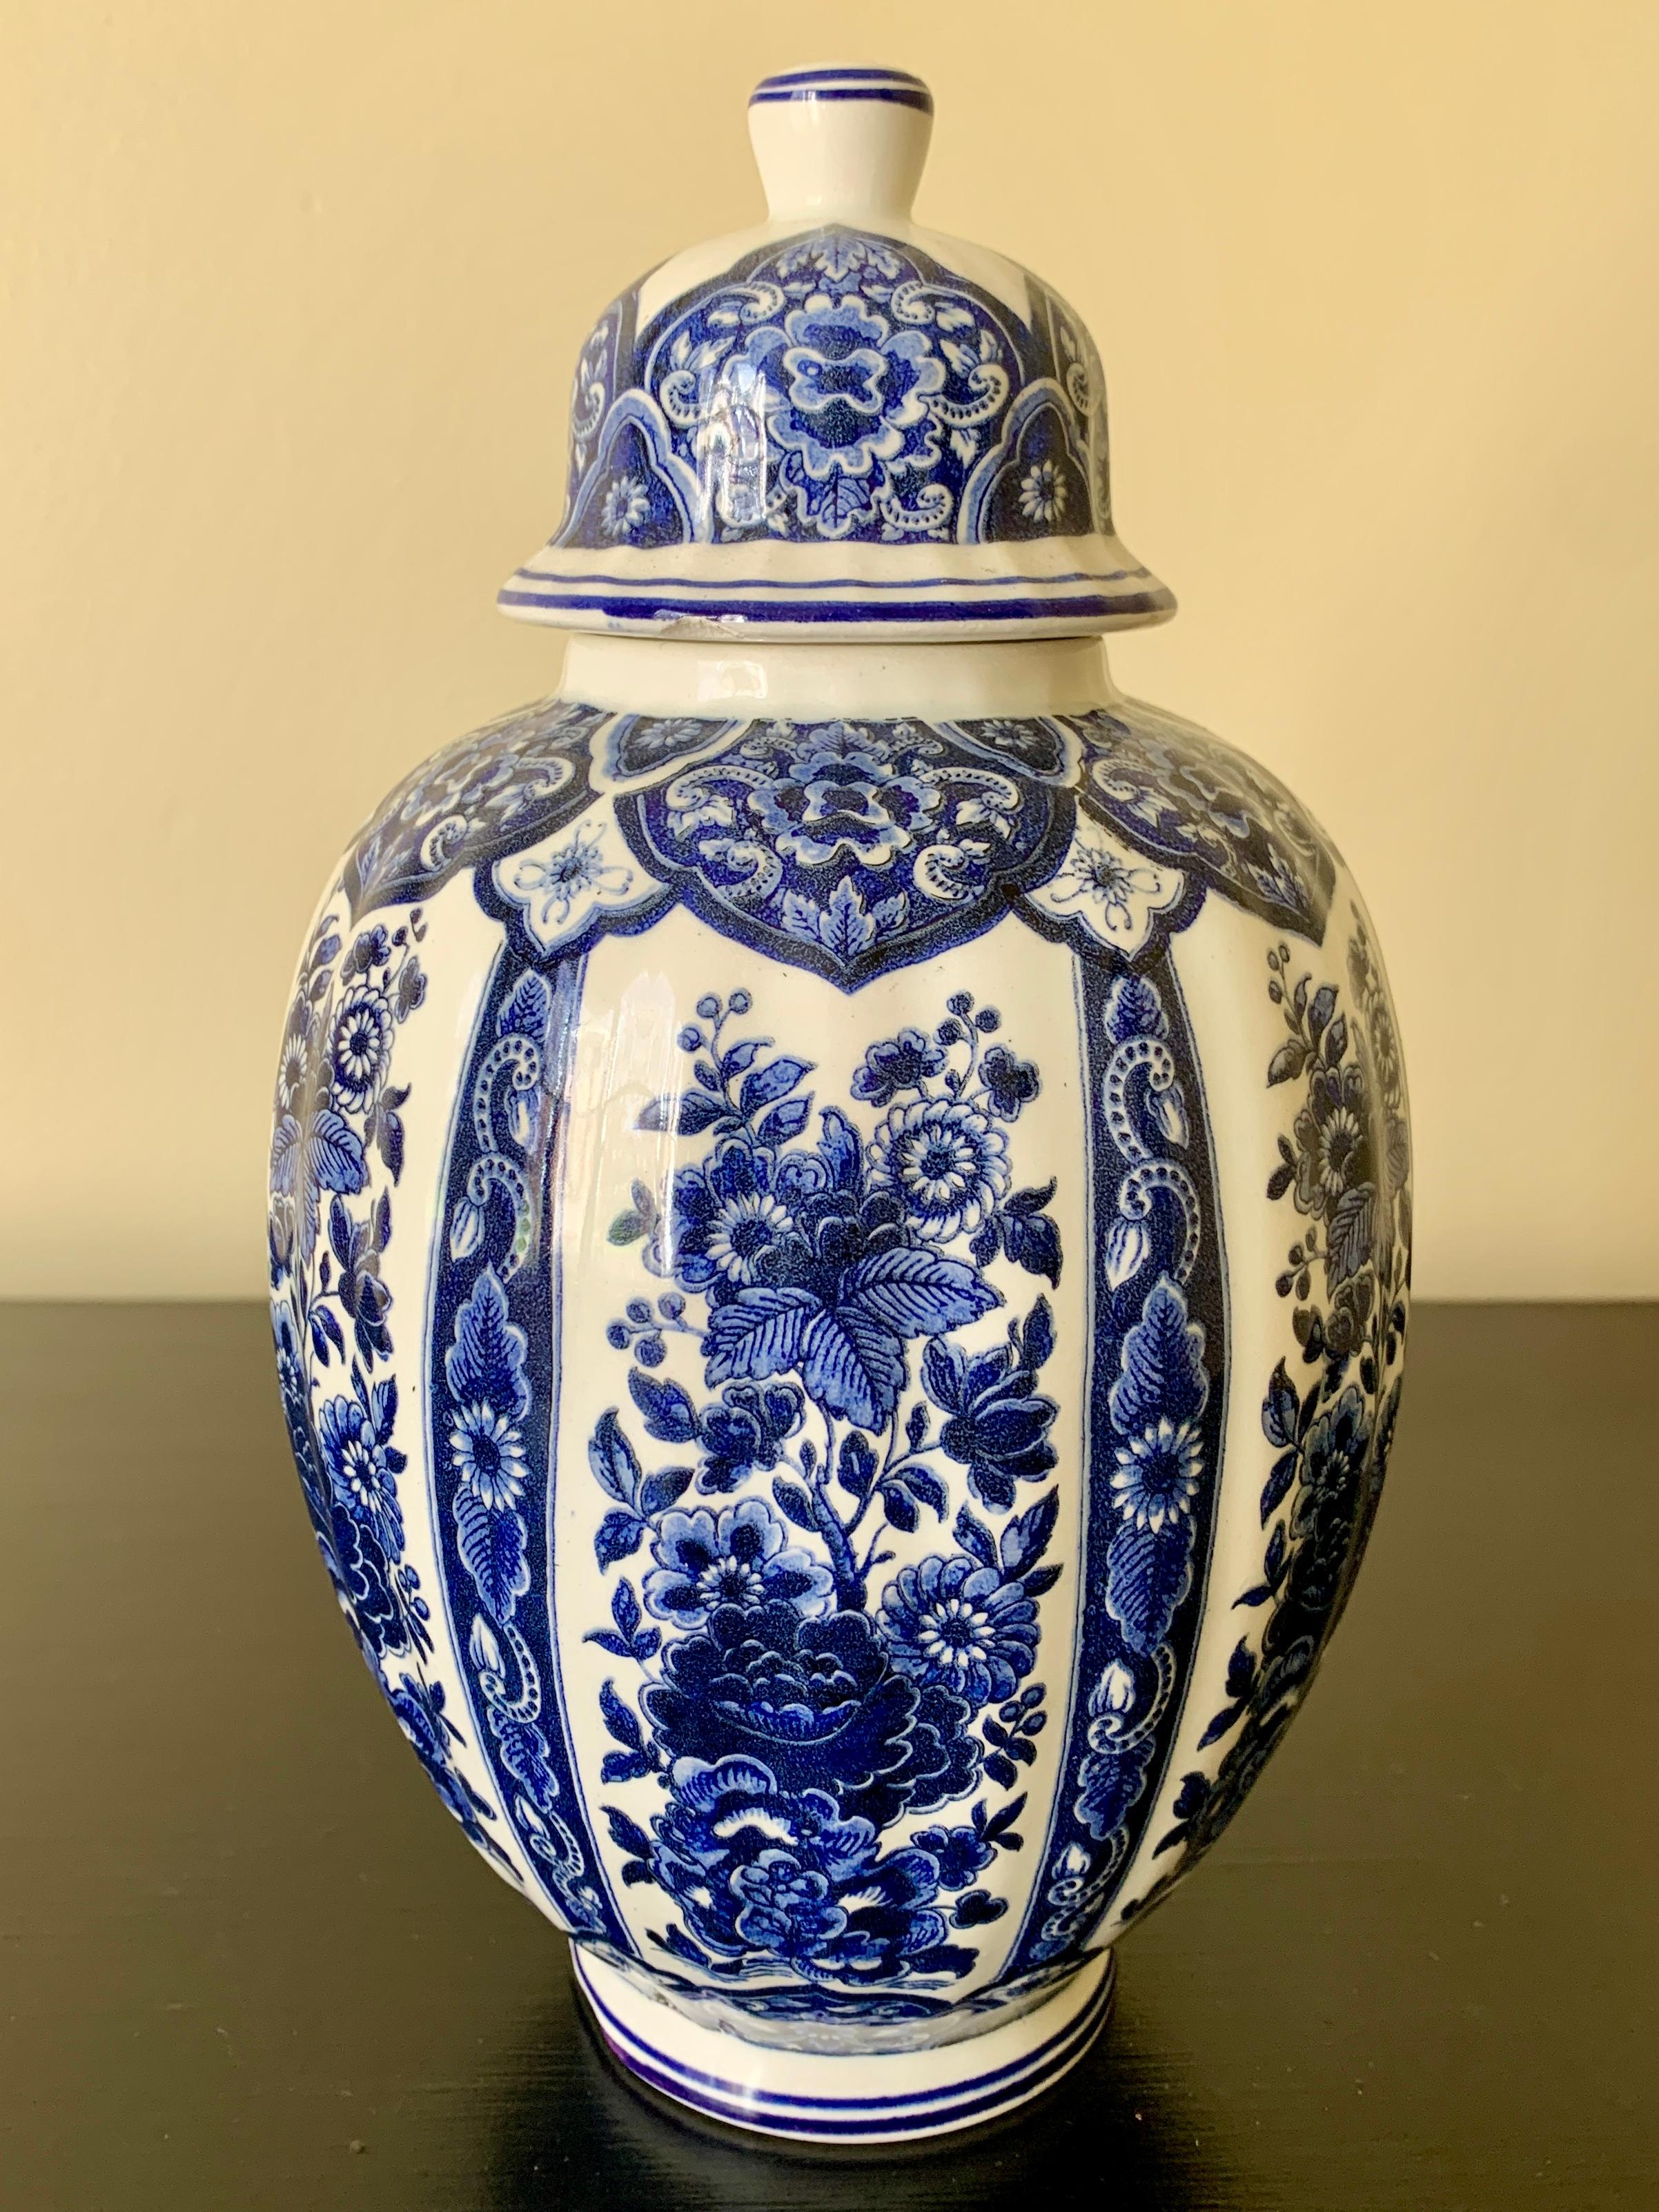 A beautiful Delft Chinoiserie style blue and white porcelain covered ginger jar or temple jar

By Ardalt Blue Delfia

Italy, Mid-20th Century

Measures: 5.25ʺW × 5.25ʺD × 9.5ʺH.

Good vintage condition. Small chips to lid and one repaired crack to